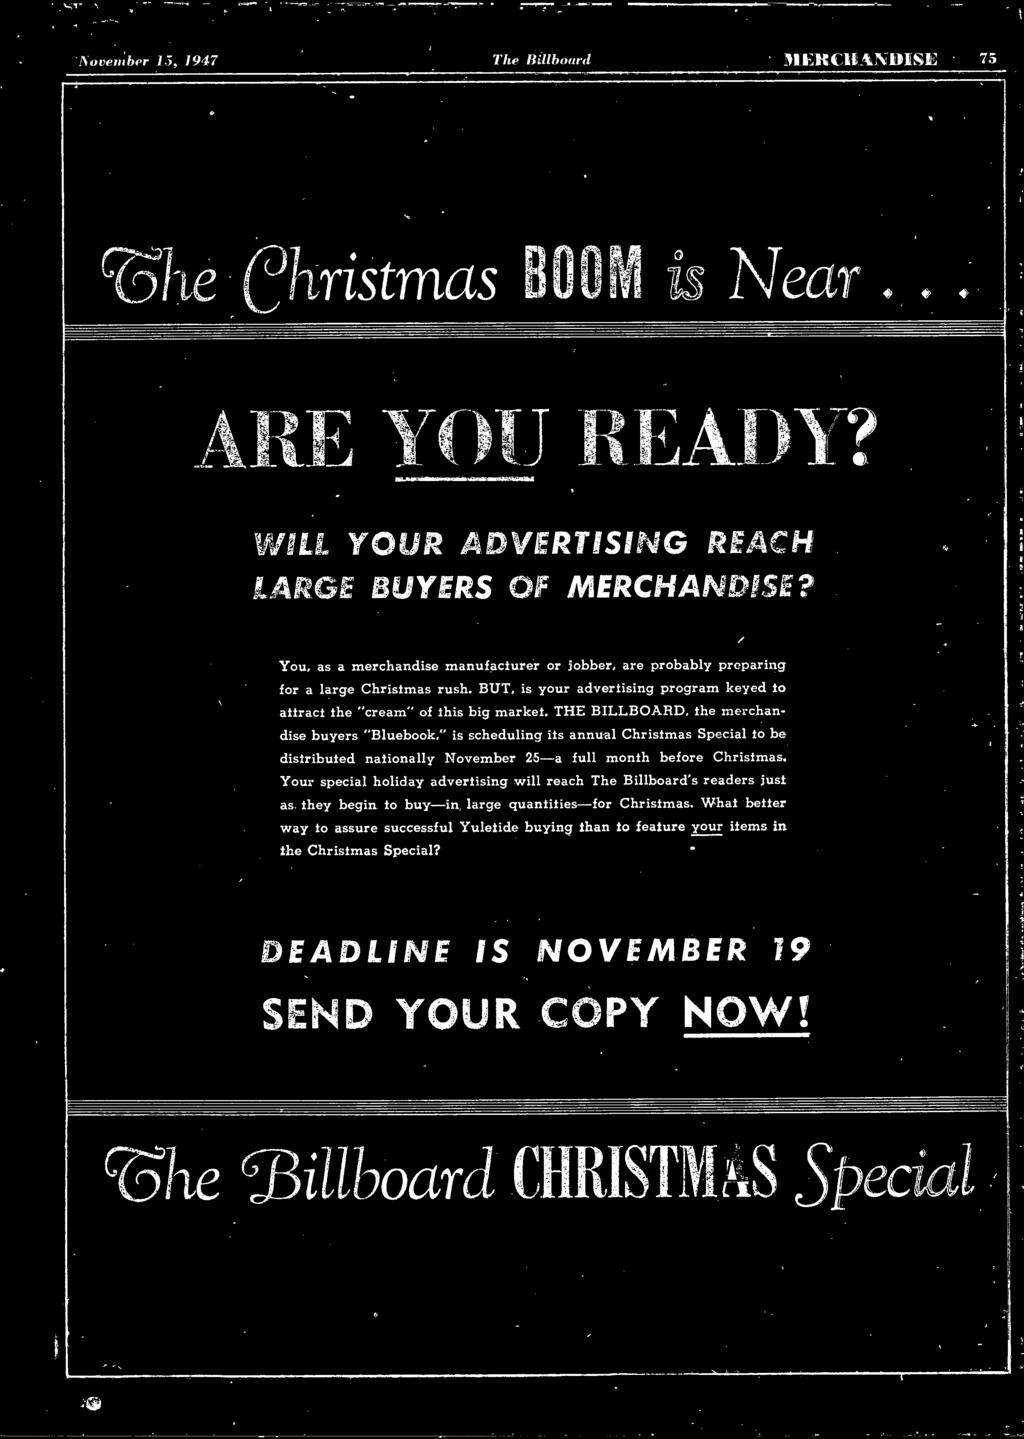 THE BILLBOARD, the merchandise buyers "Bluebook," is scheduling its annual Christmas Special to be distributed nationally November 25-a full month before Christmas.